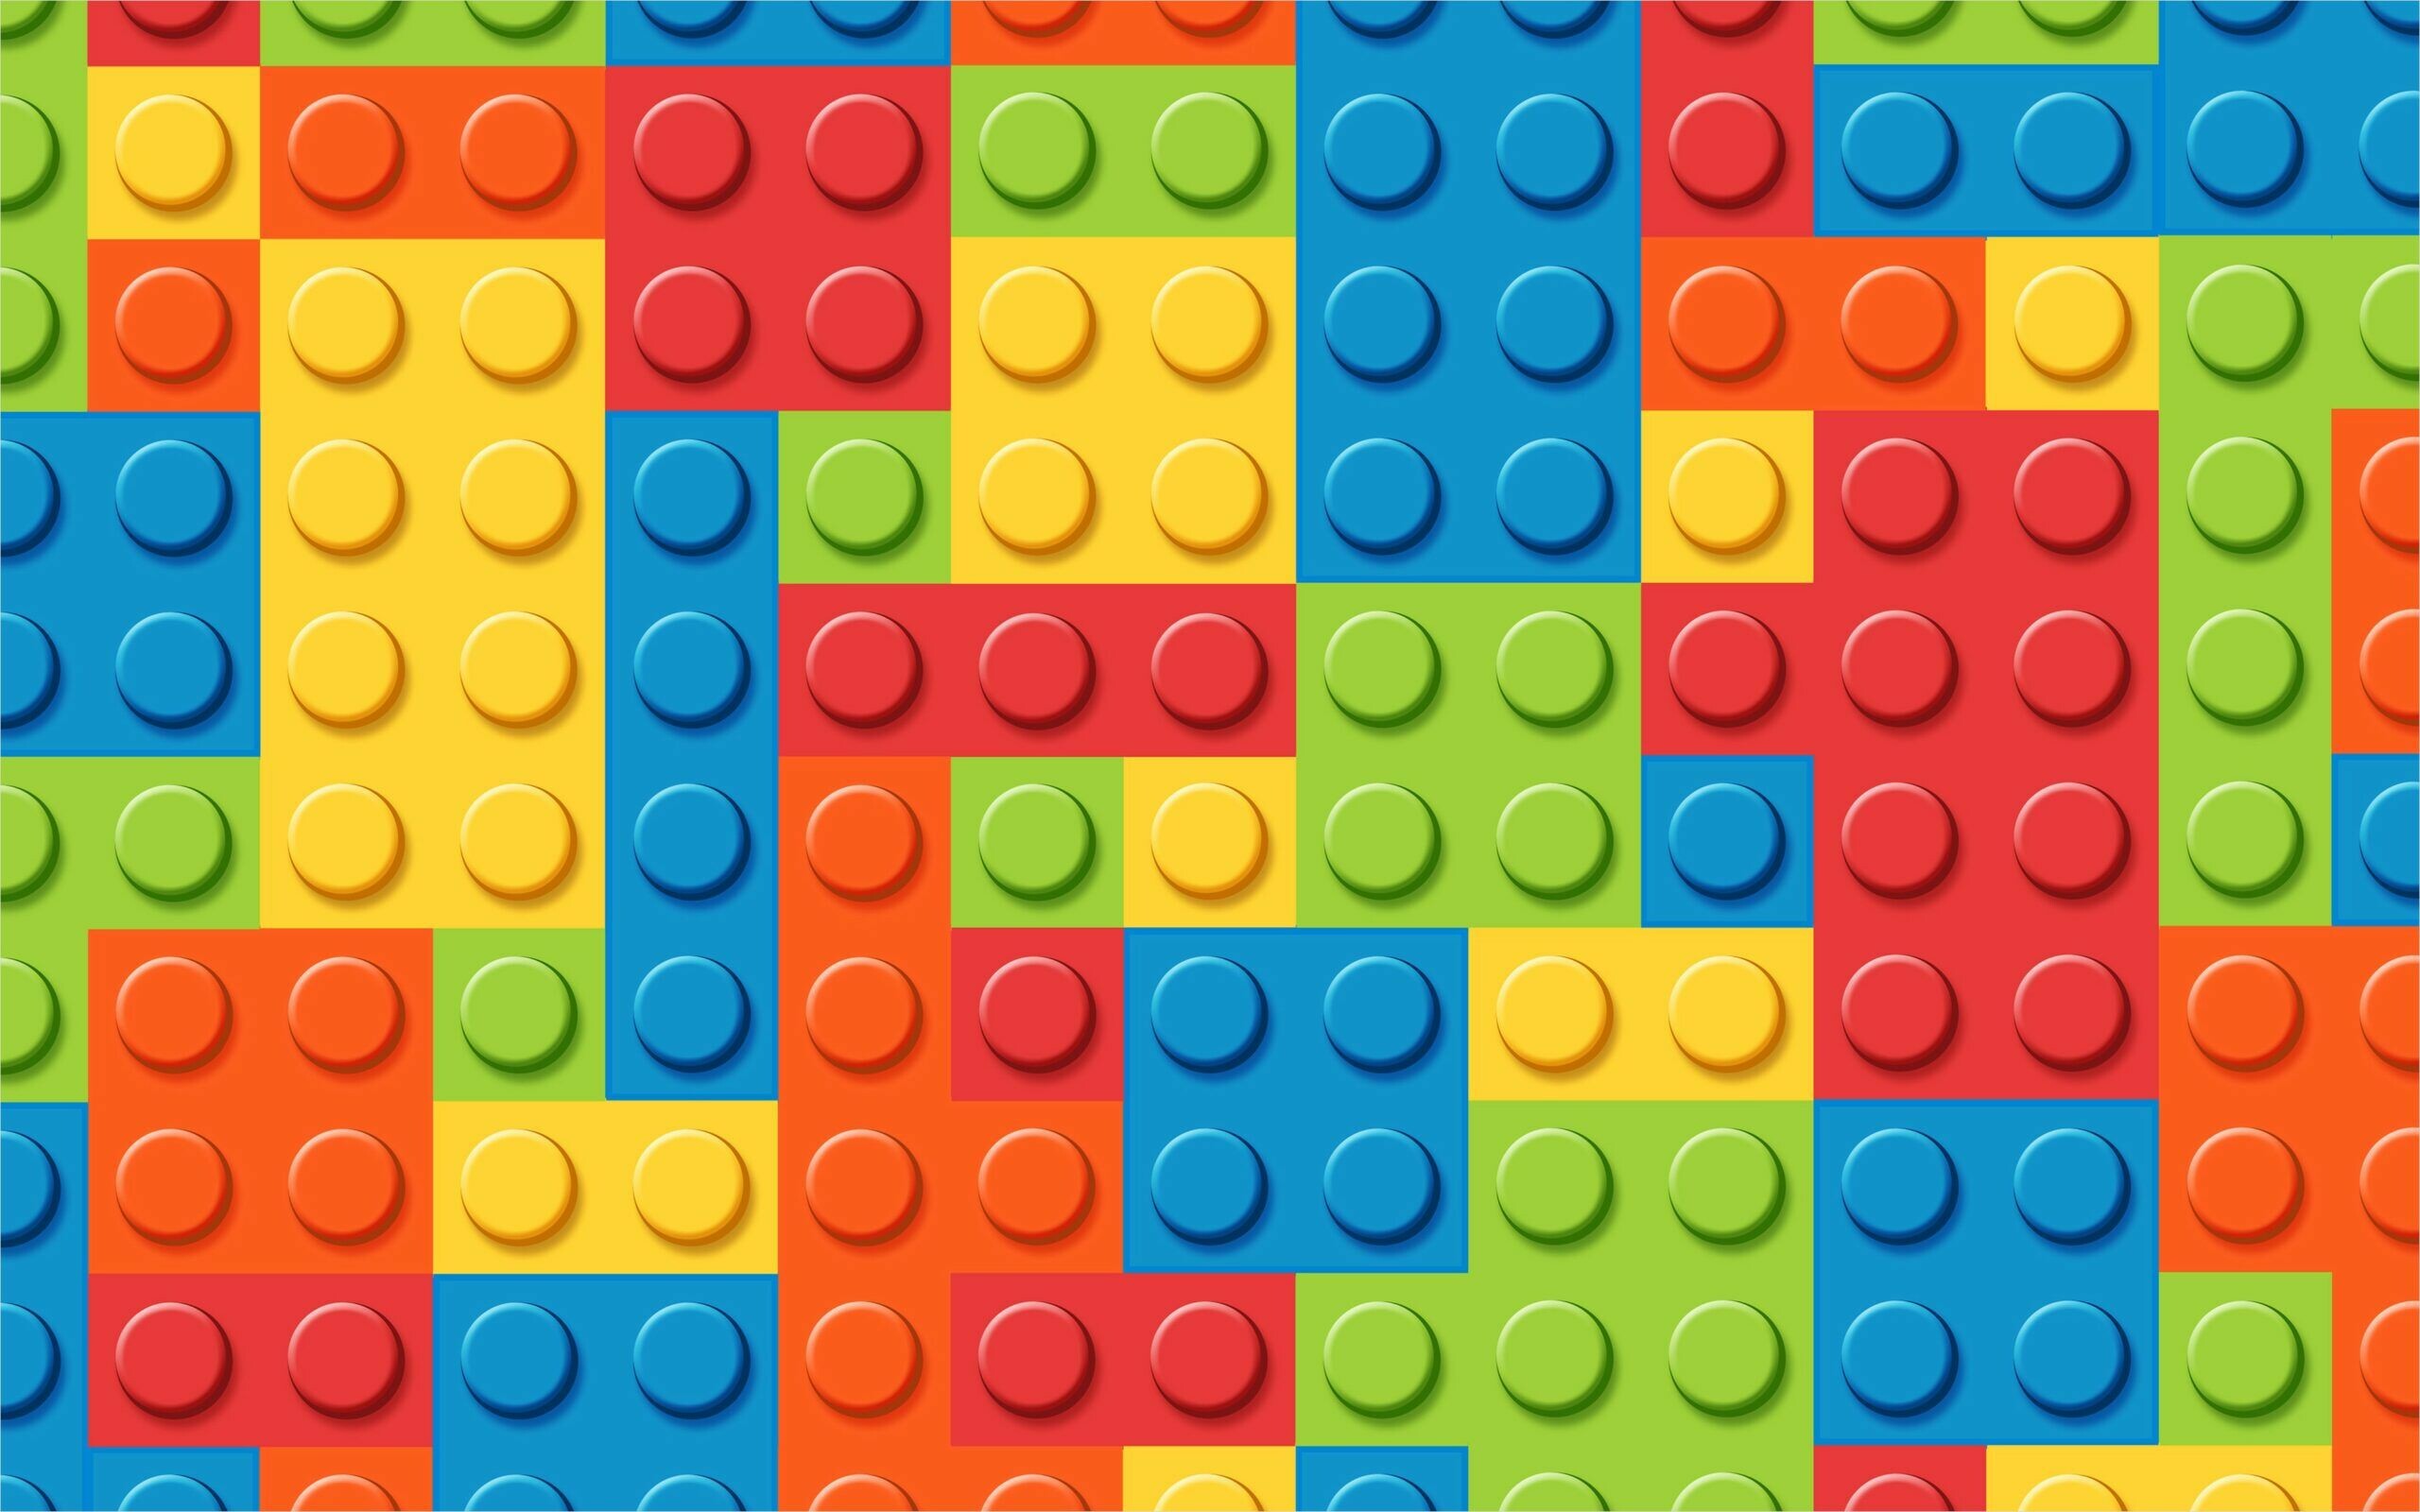 Lego: Used to create models of anything, from animals to robots and buildings. 2560x1600 HD Wallpaper.